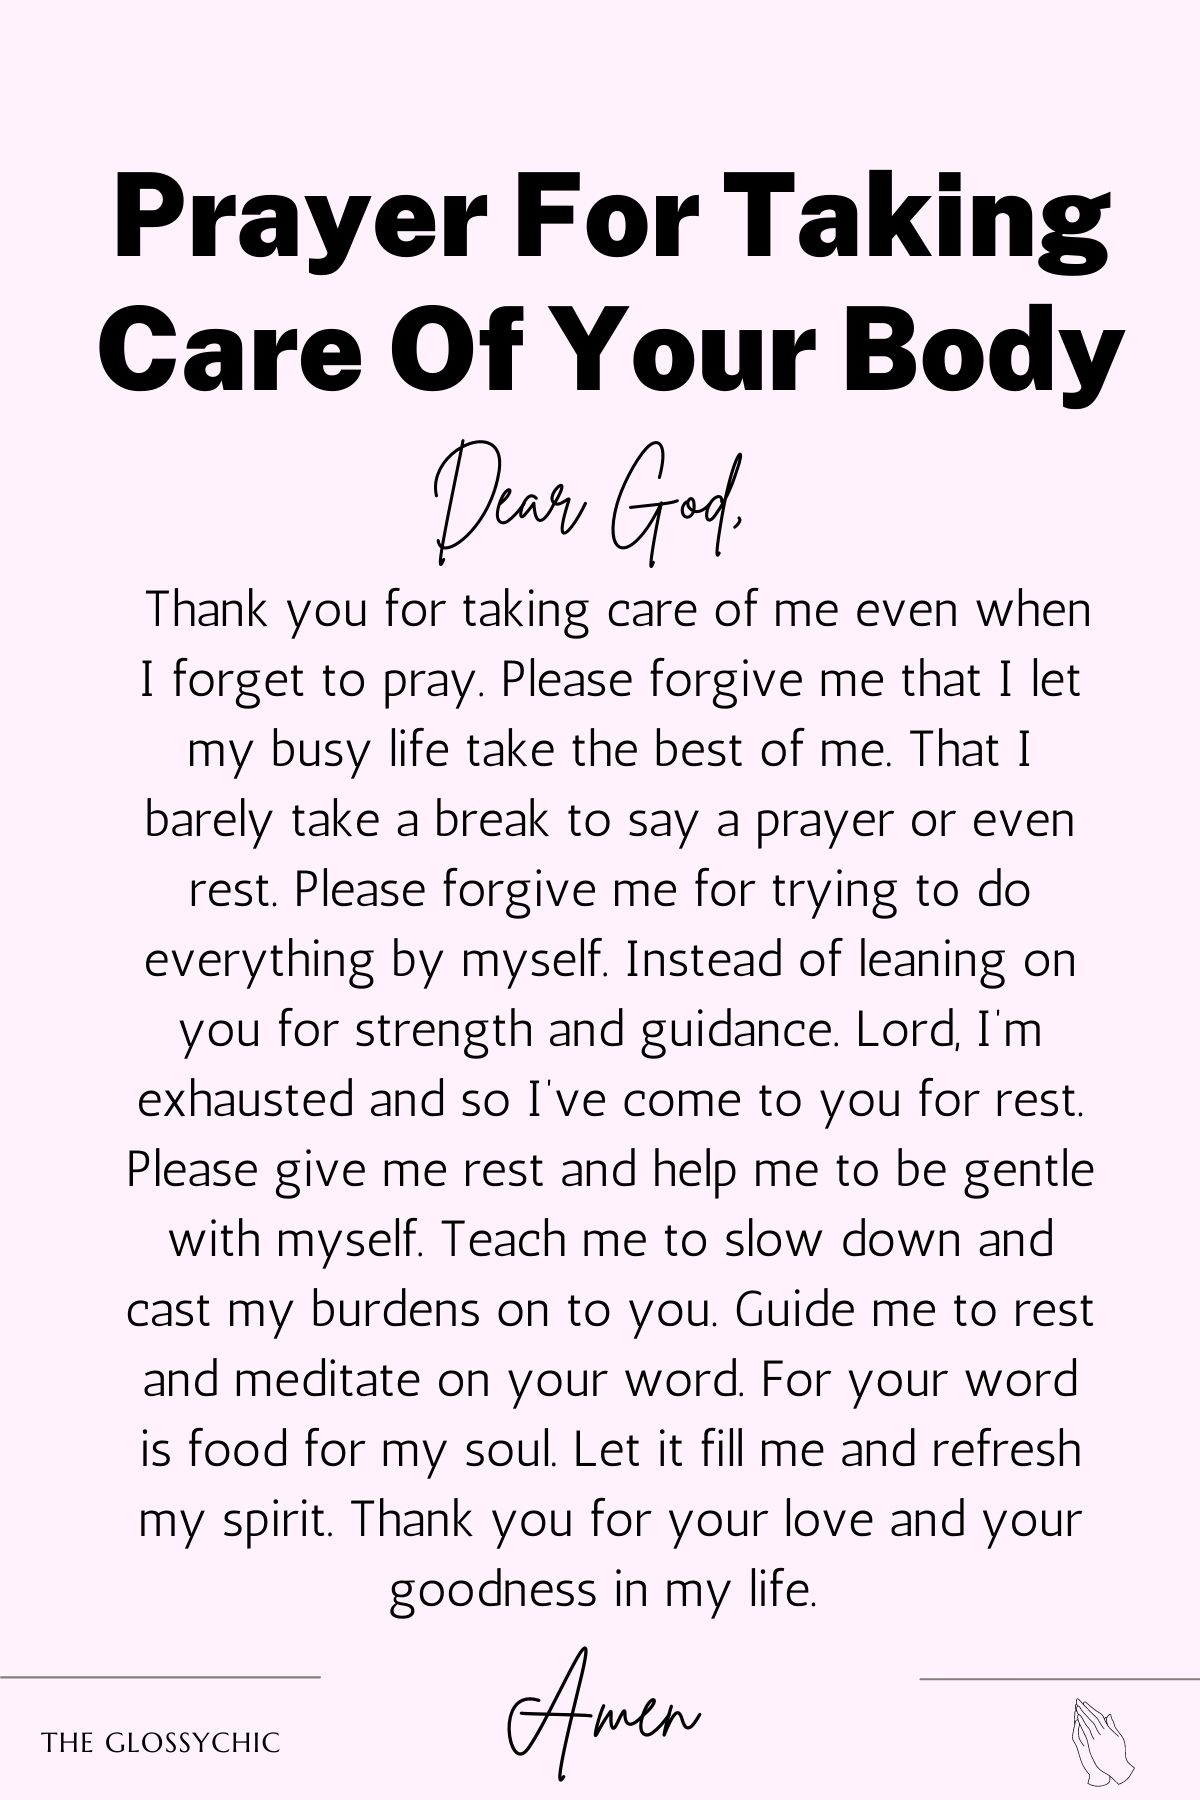 Prayer For Taking Care Of Your Body